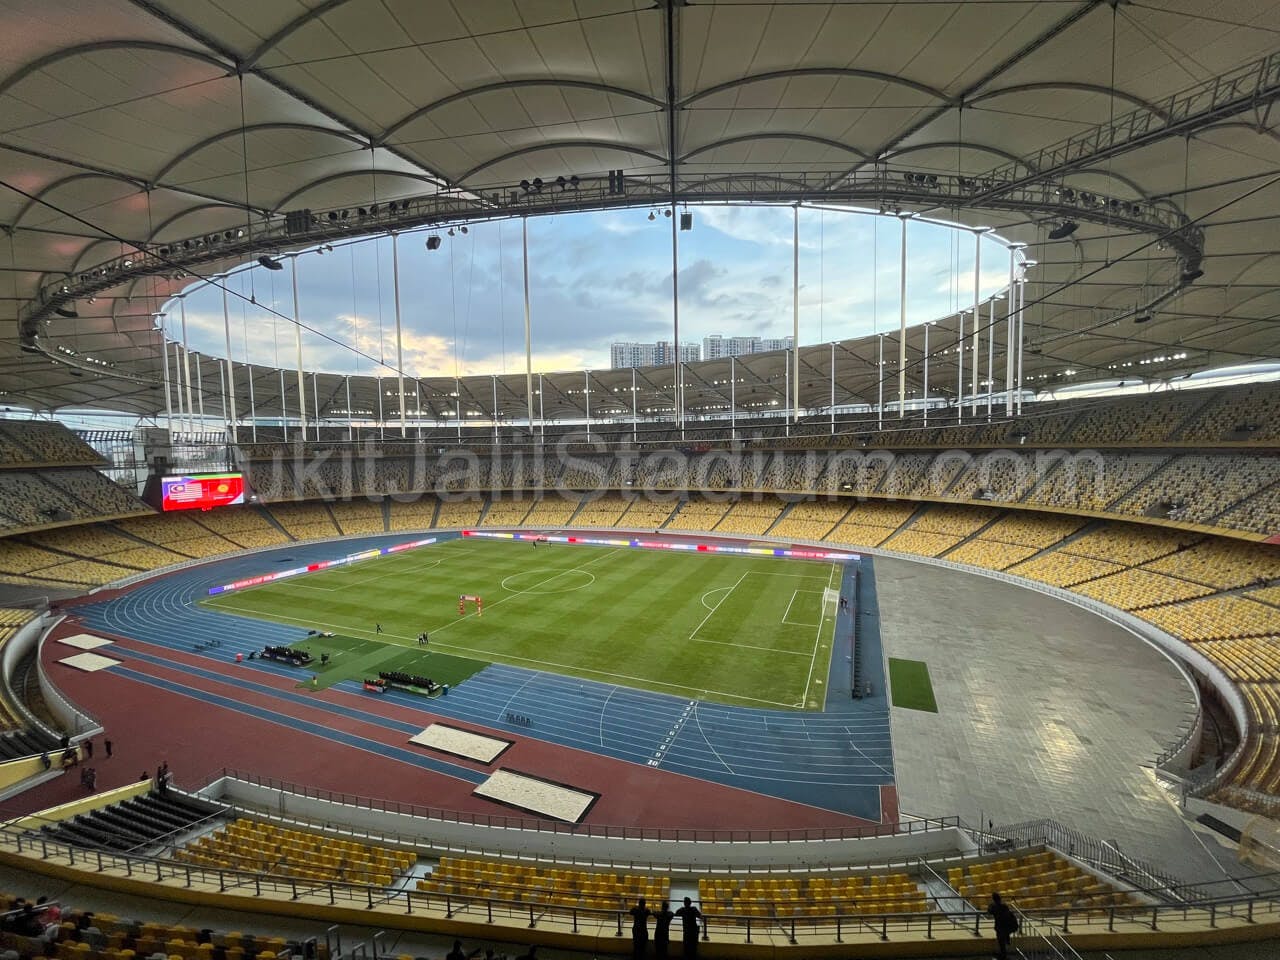 0.5x View of Bukit Jalil field from section 328 of Stadium Bukit Jalil.